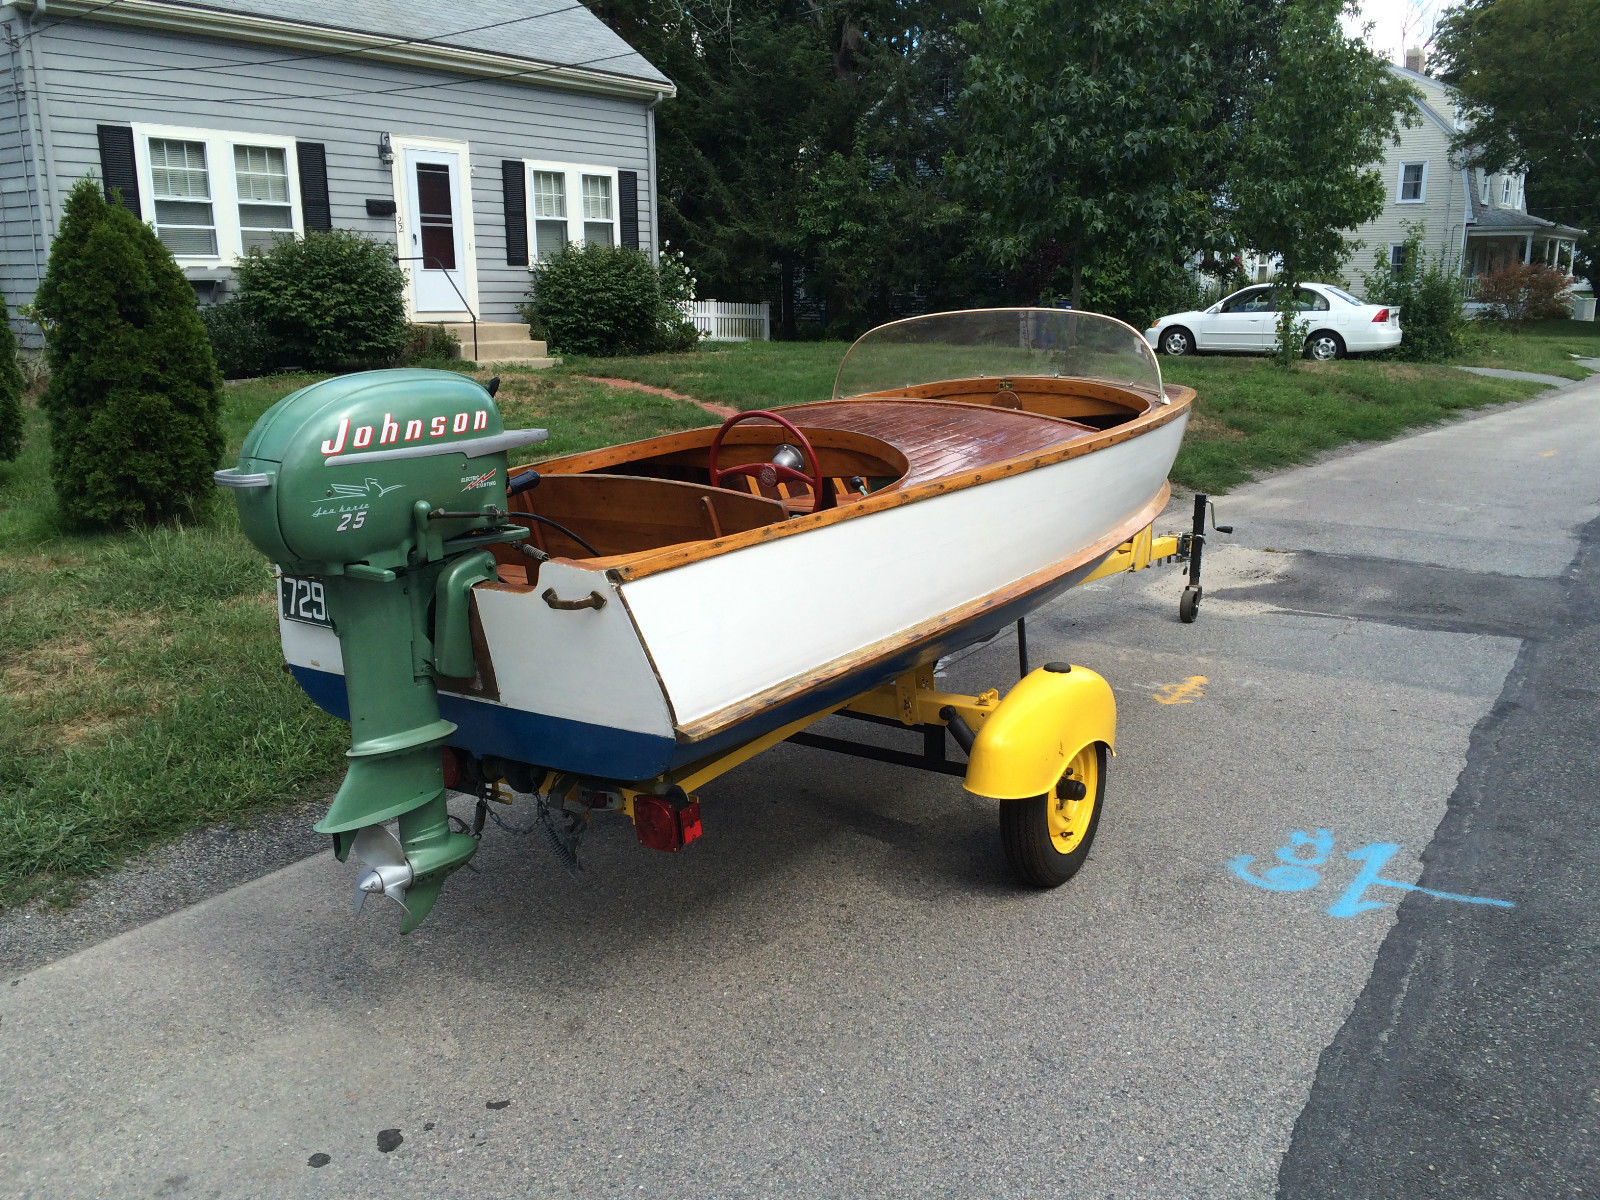 wood runabout